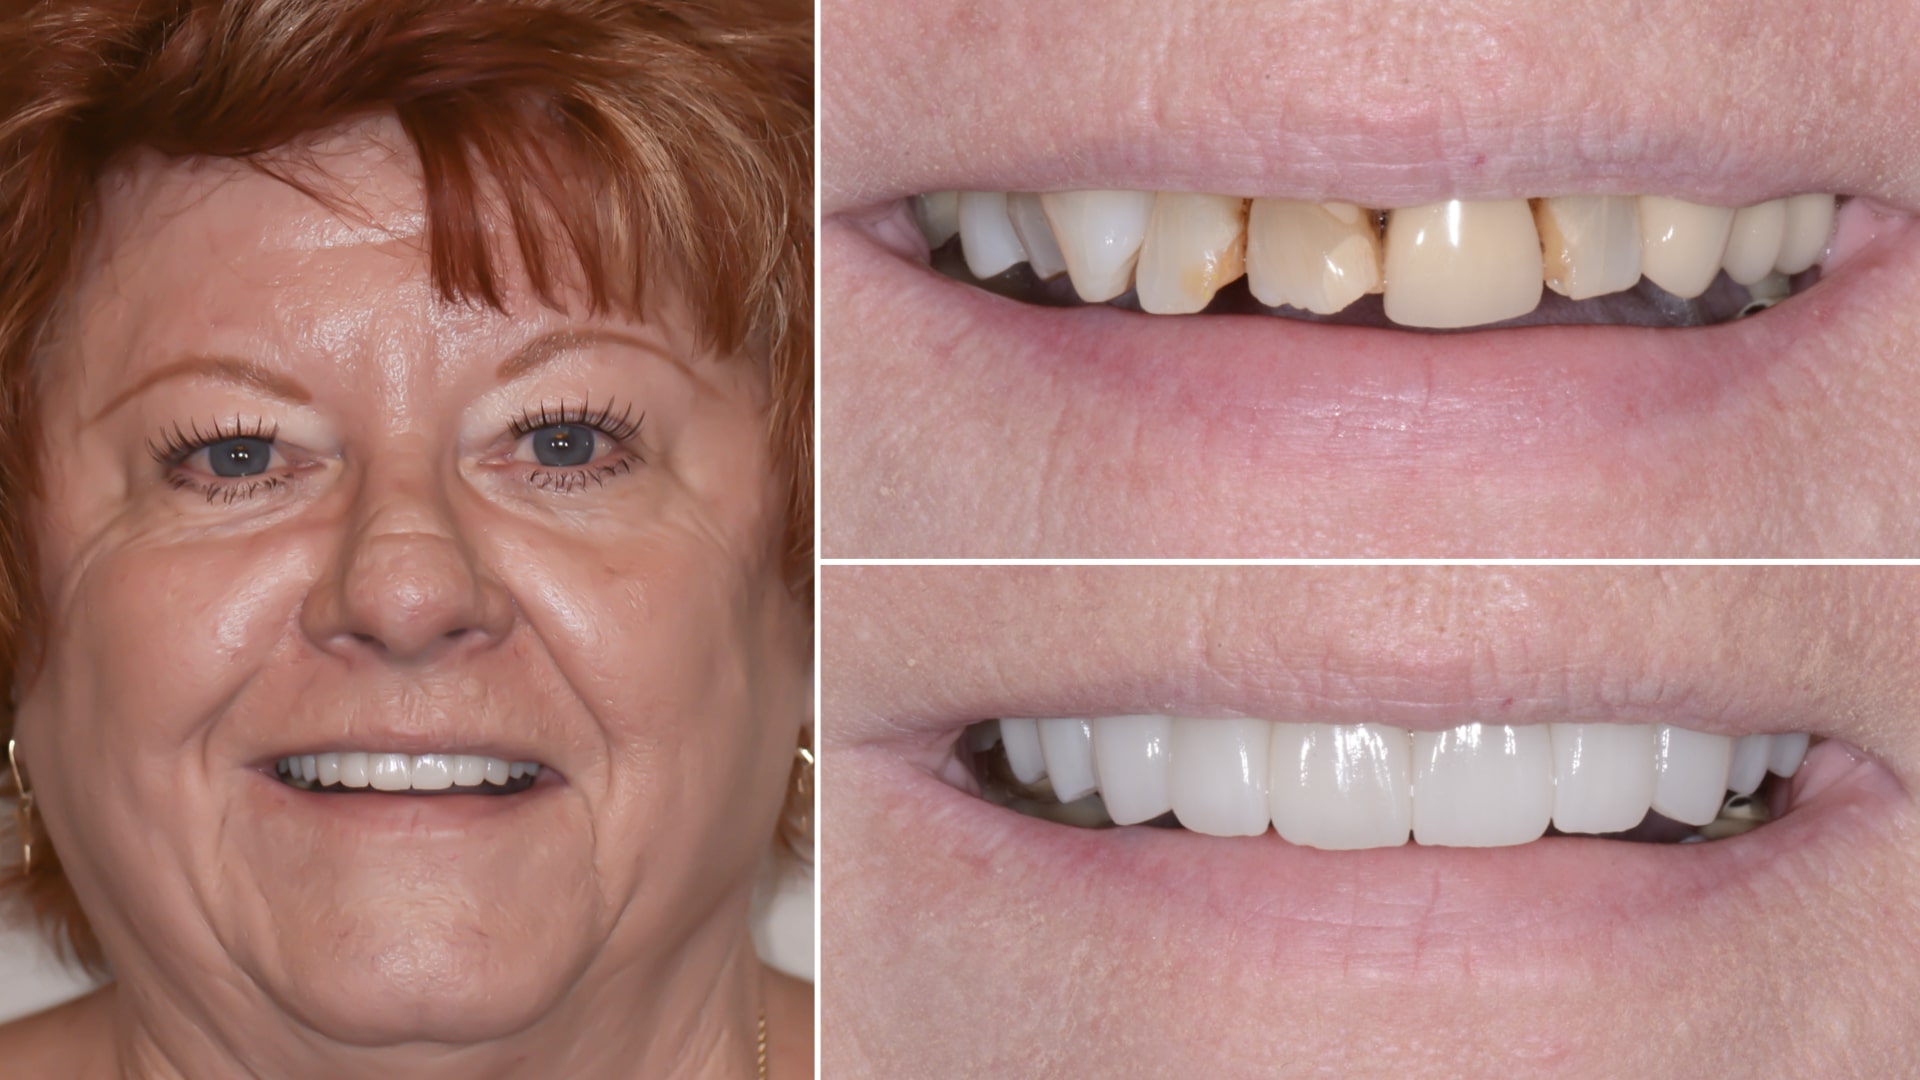 Woman's smile before and after repairing damaged and discolored teeth